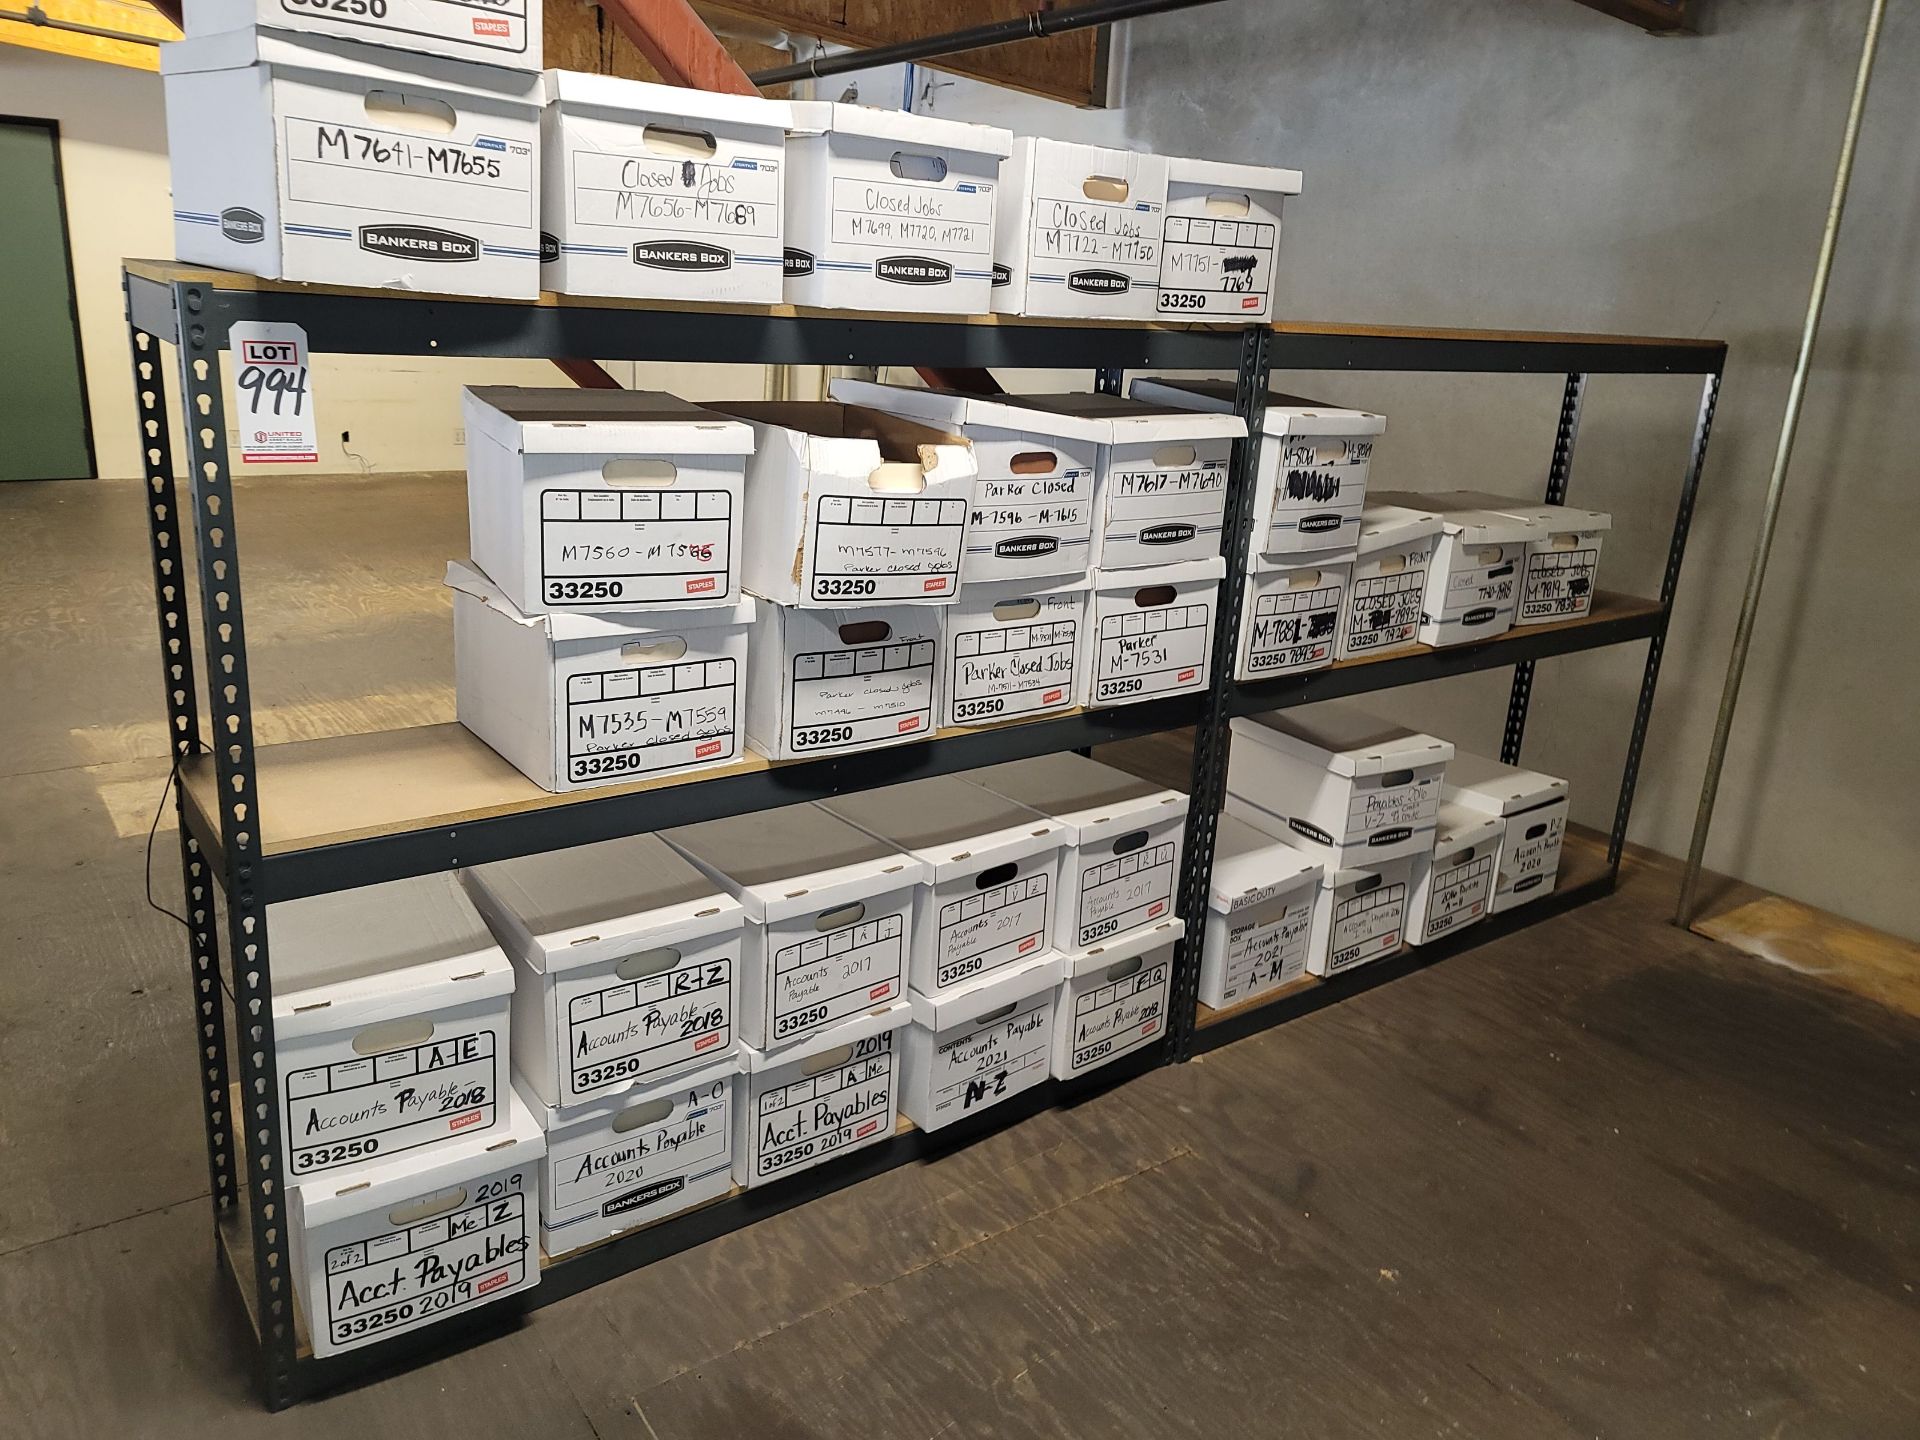 LOT - (4) STEEL SHELF UNITS W/ PARTICLE BOARD SHELVES, 69" X 15" X 5'HT, CONTENTS NOT INCLUDED